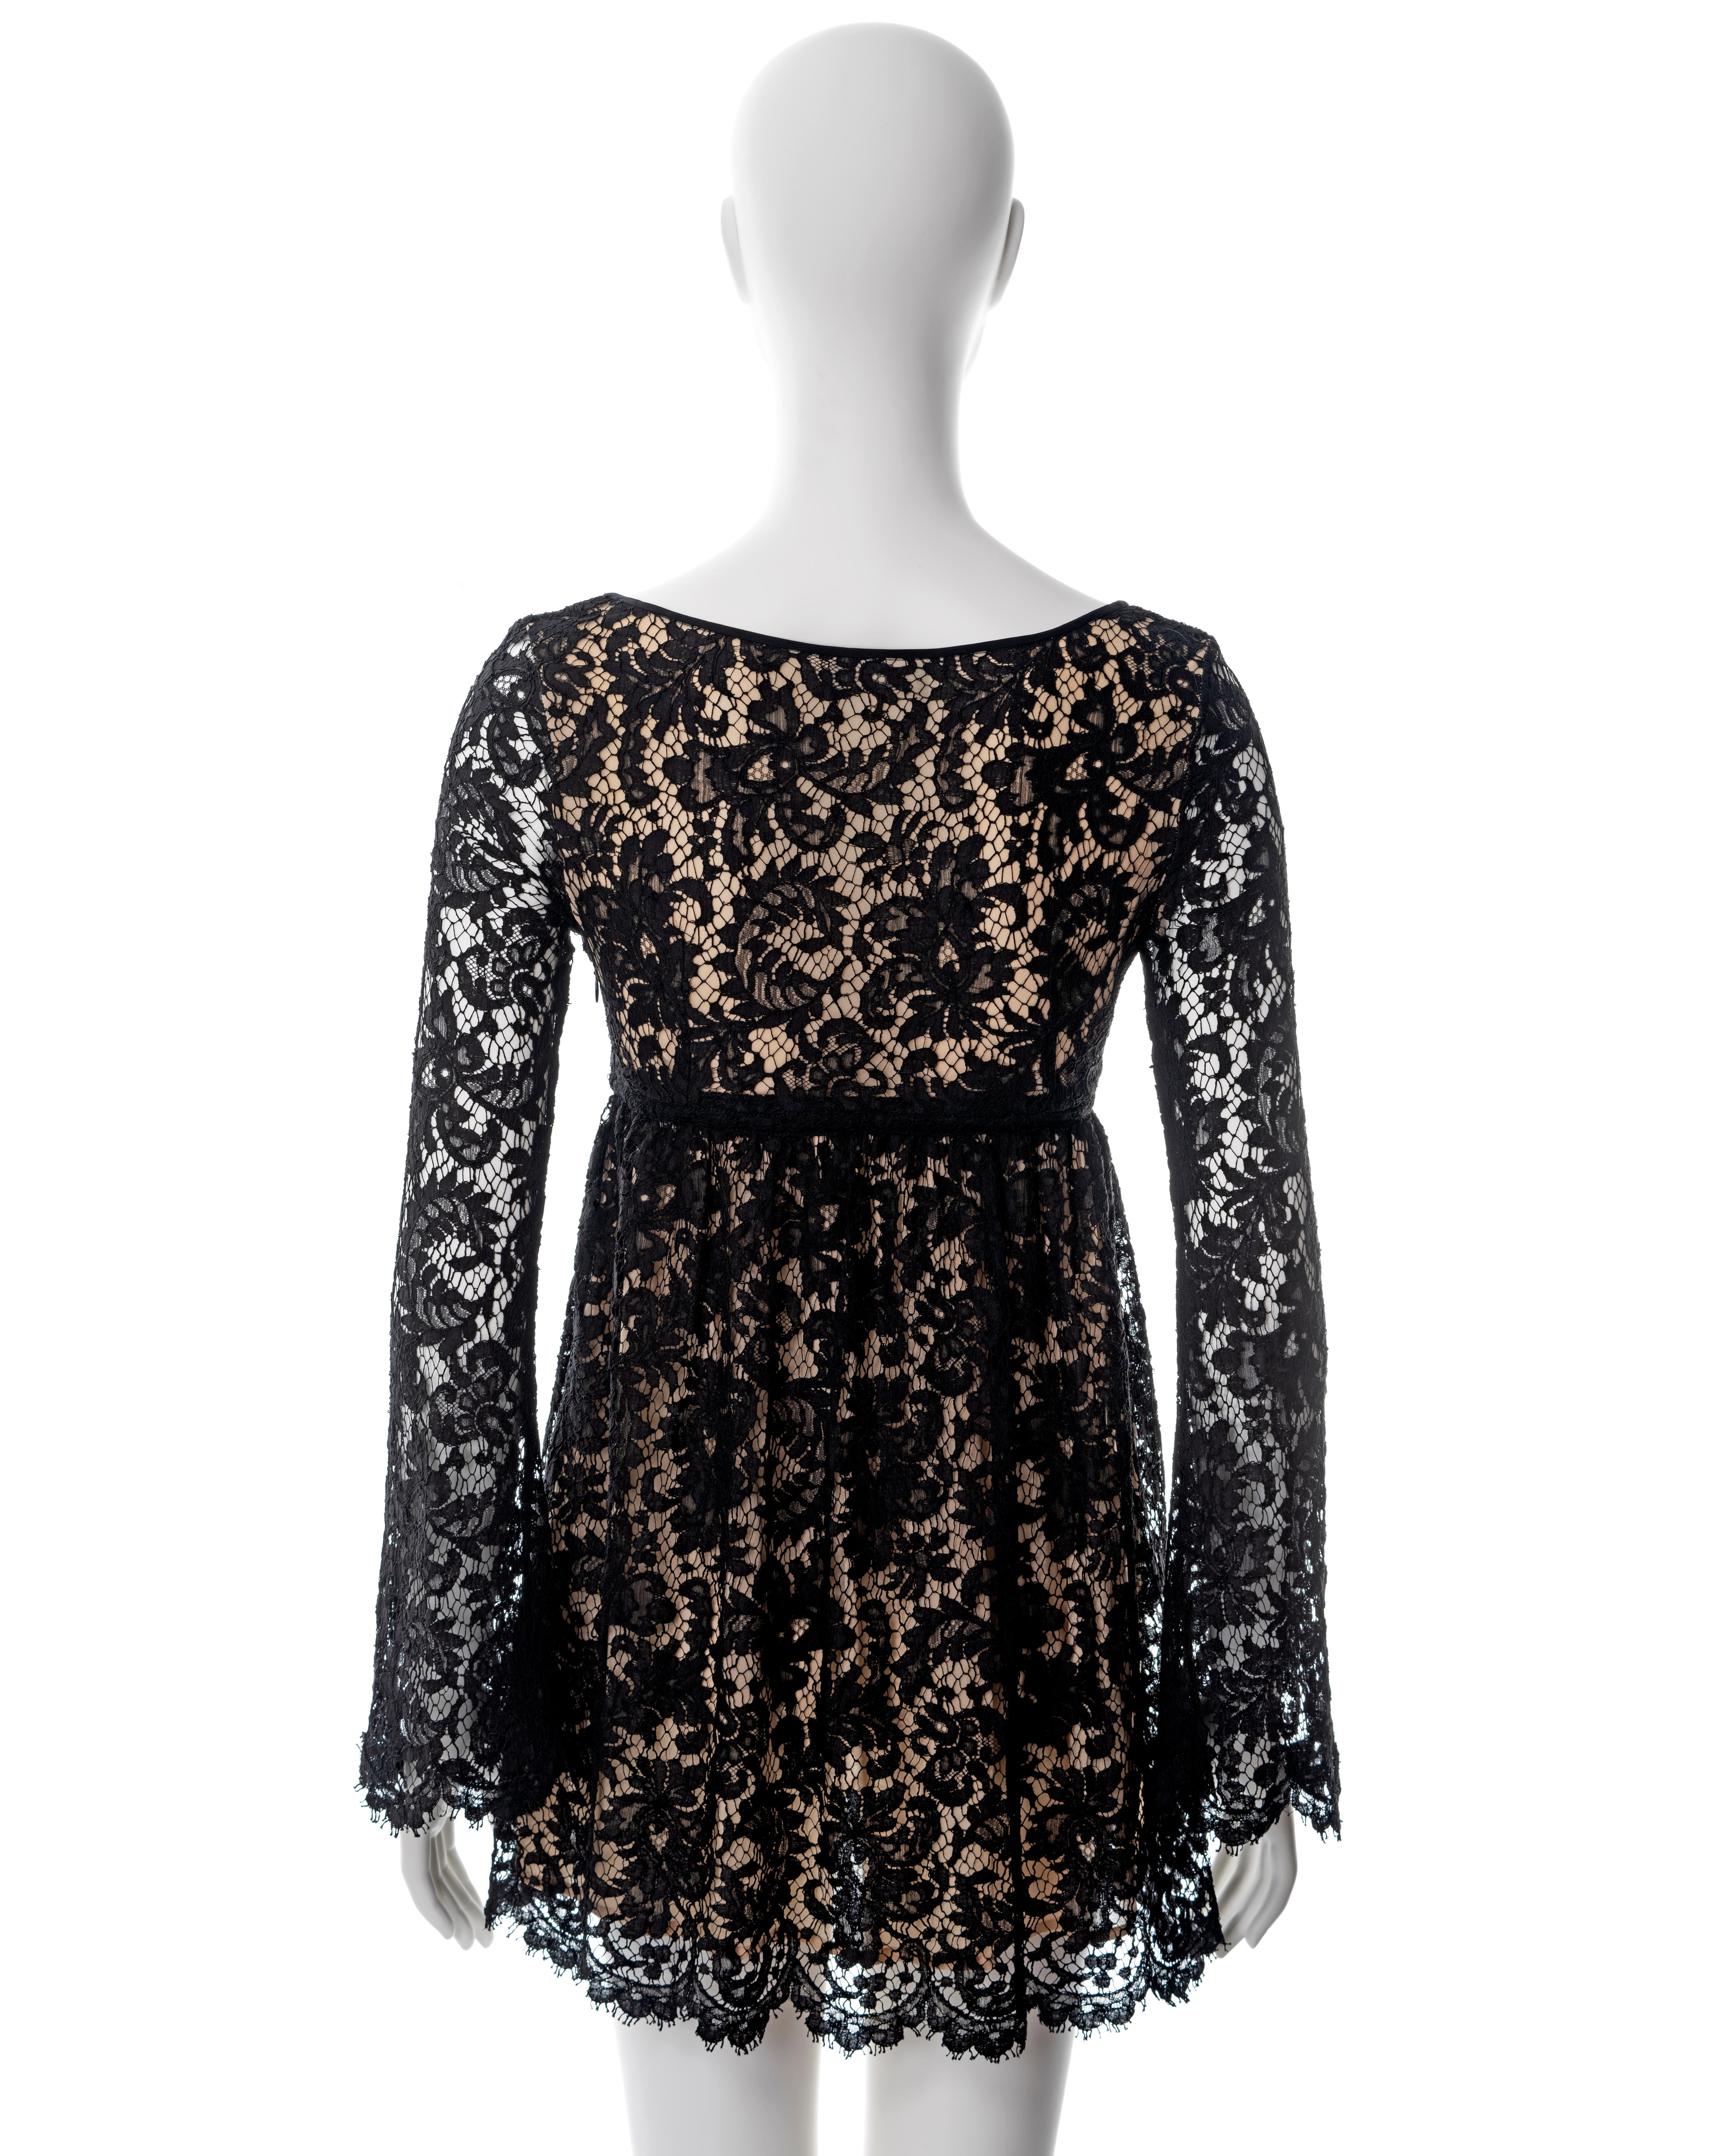 Gucci by Tom Ford black lace long sleeve mini dress, ss 1996 For Sale 4